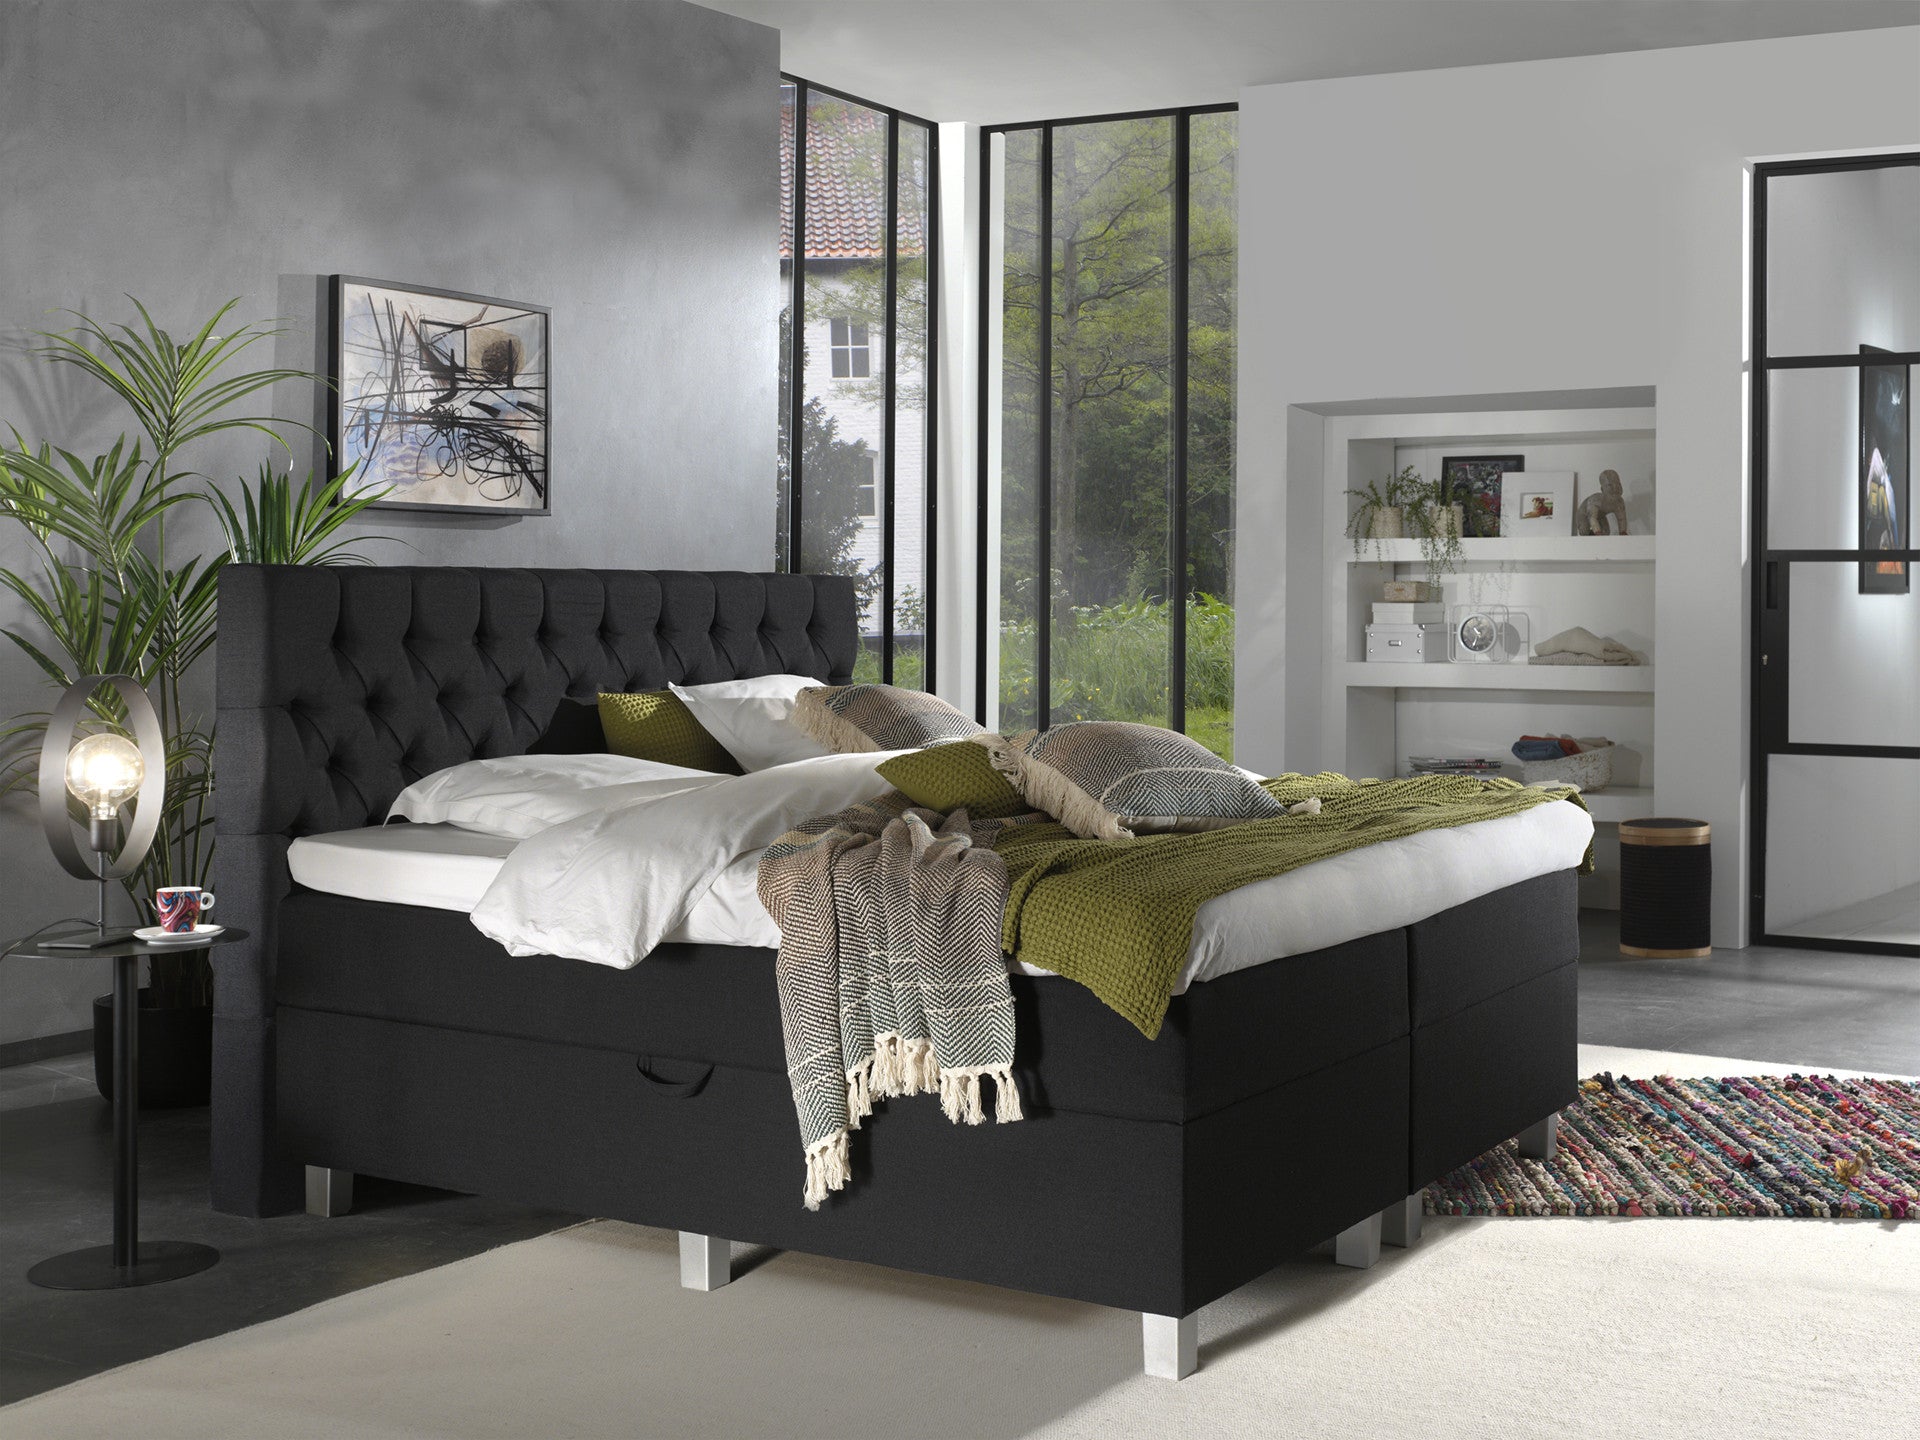 straal Grand maximaal 2 persoons boxspring kopen? | SALE | Budget-Bed.nl